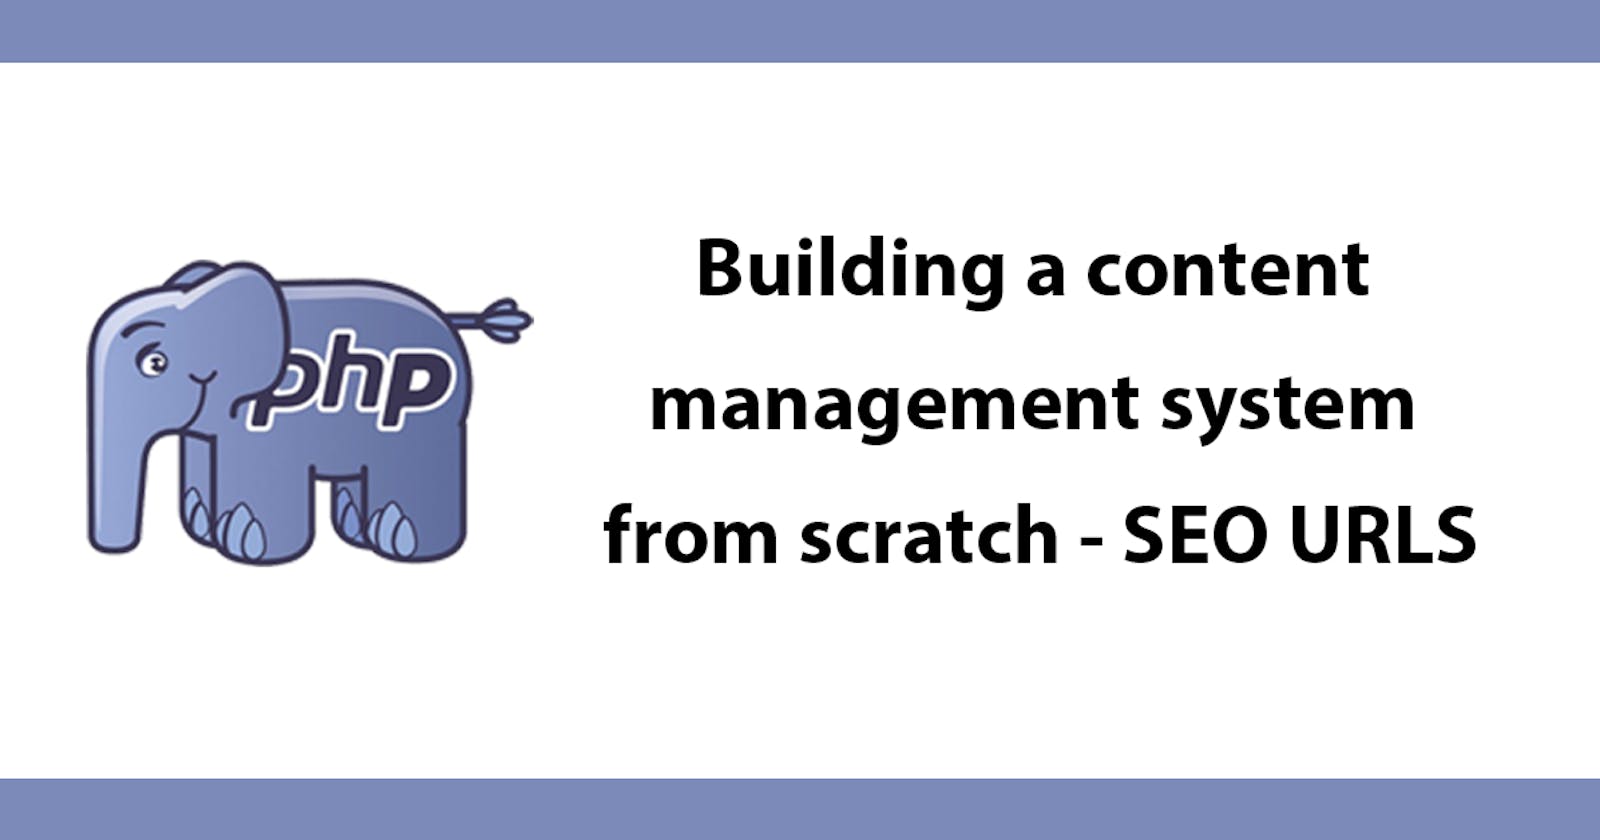 Building a content management system from scratch - SEO URLS